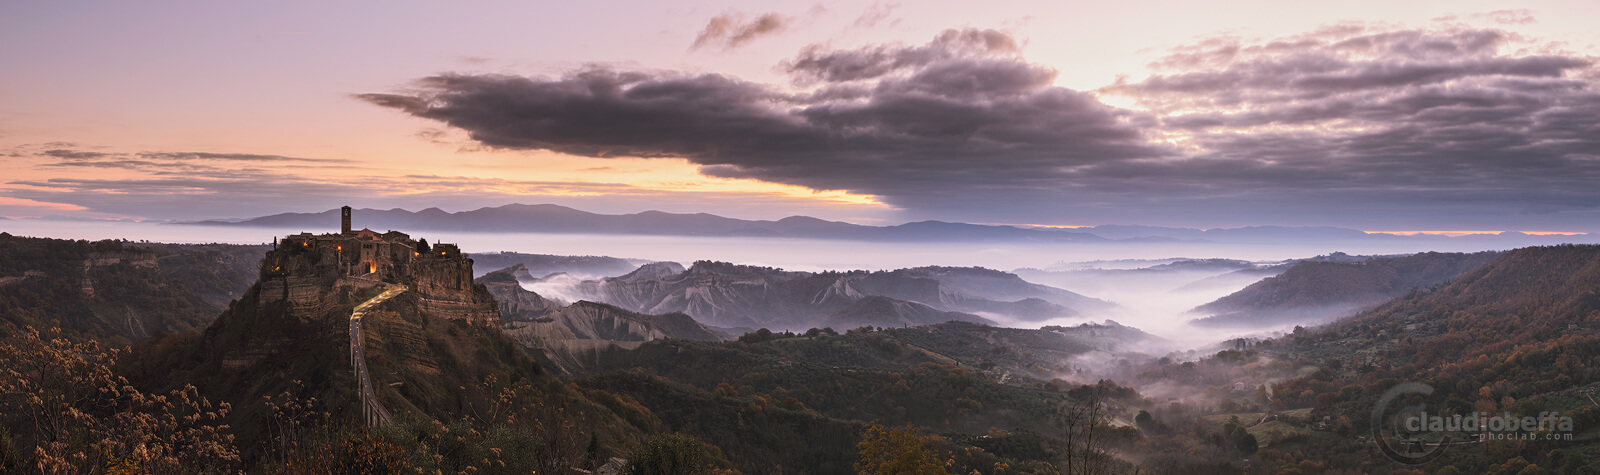 Sunrise, Civita di Bagnoregio, Dying town, Italy, Mist, Fog, Valley, Badlands, Mountains, Forests, Town, Clouds, Panorama